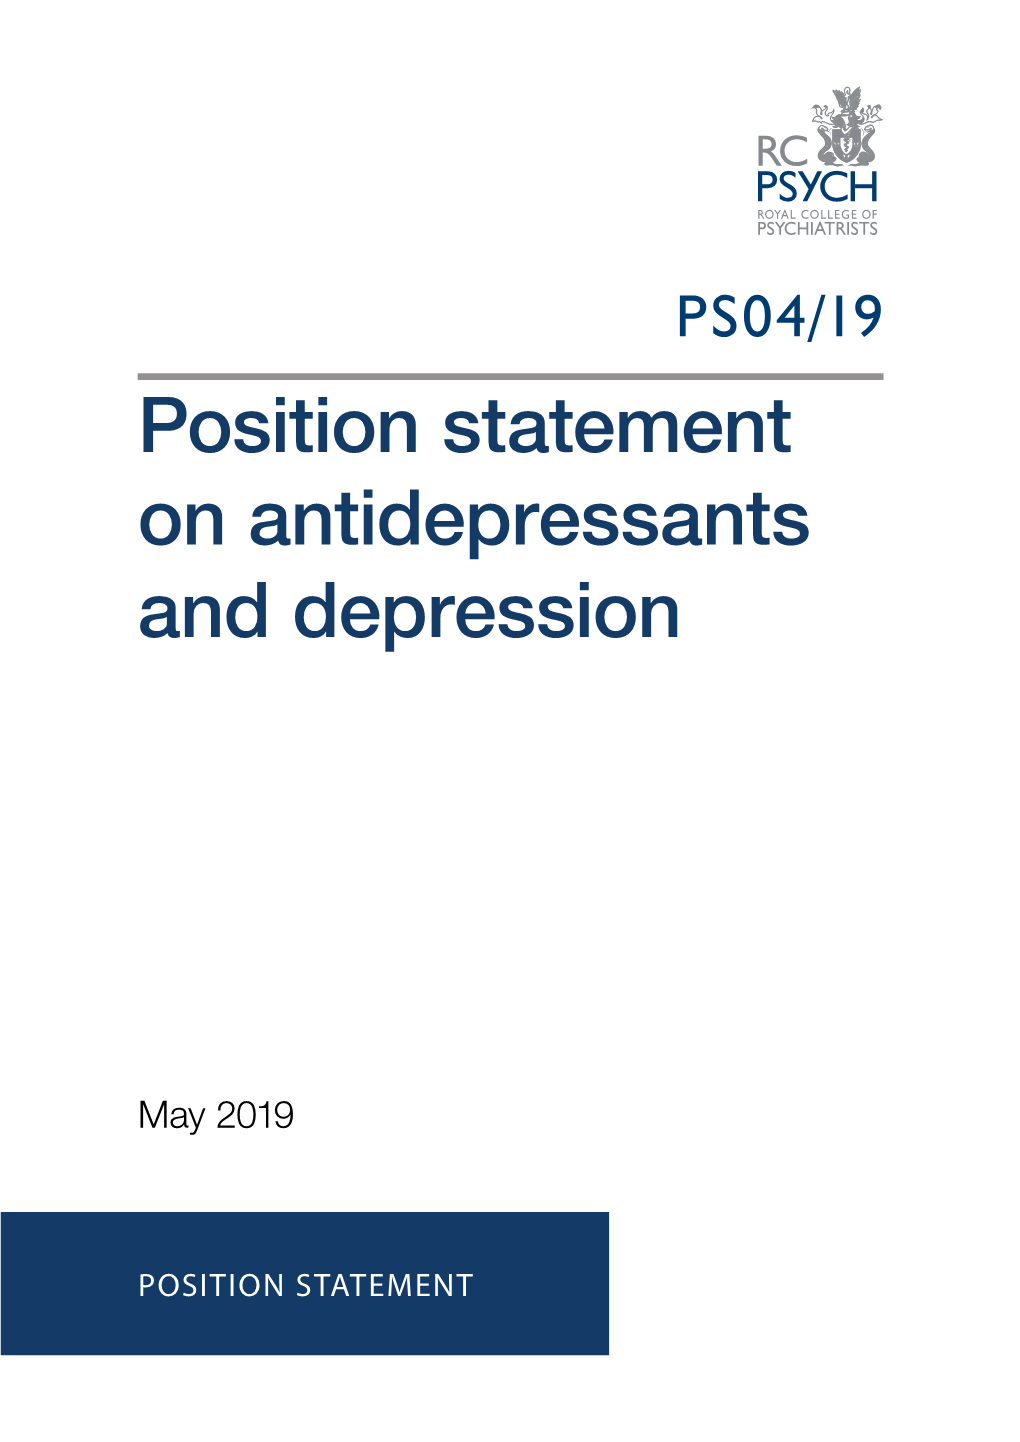 Position Statement on Antidepressants and Depression